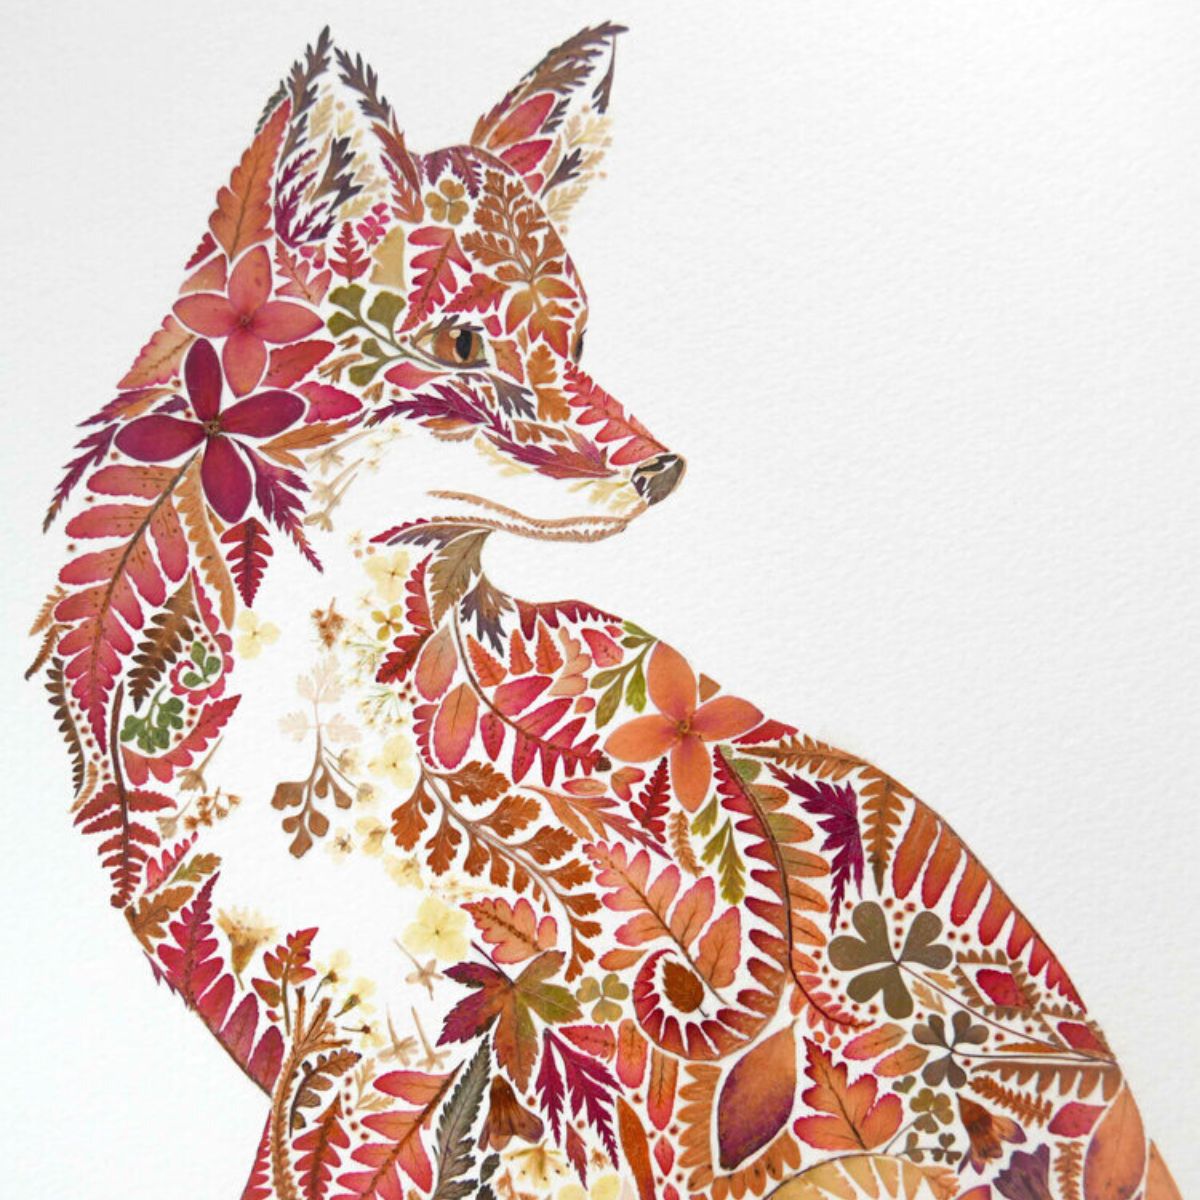 Image of a fox using pressed flowrs